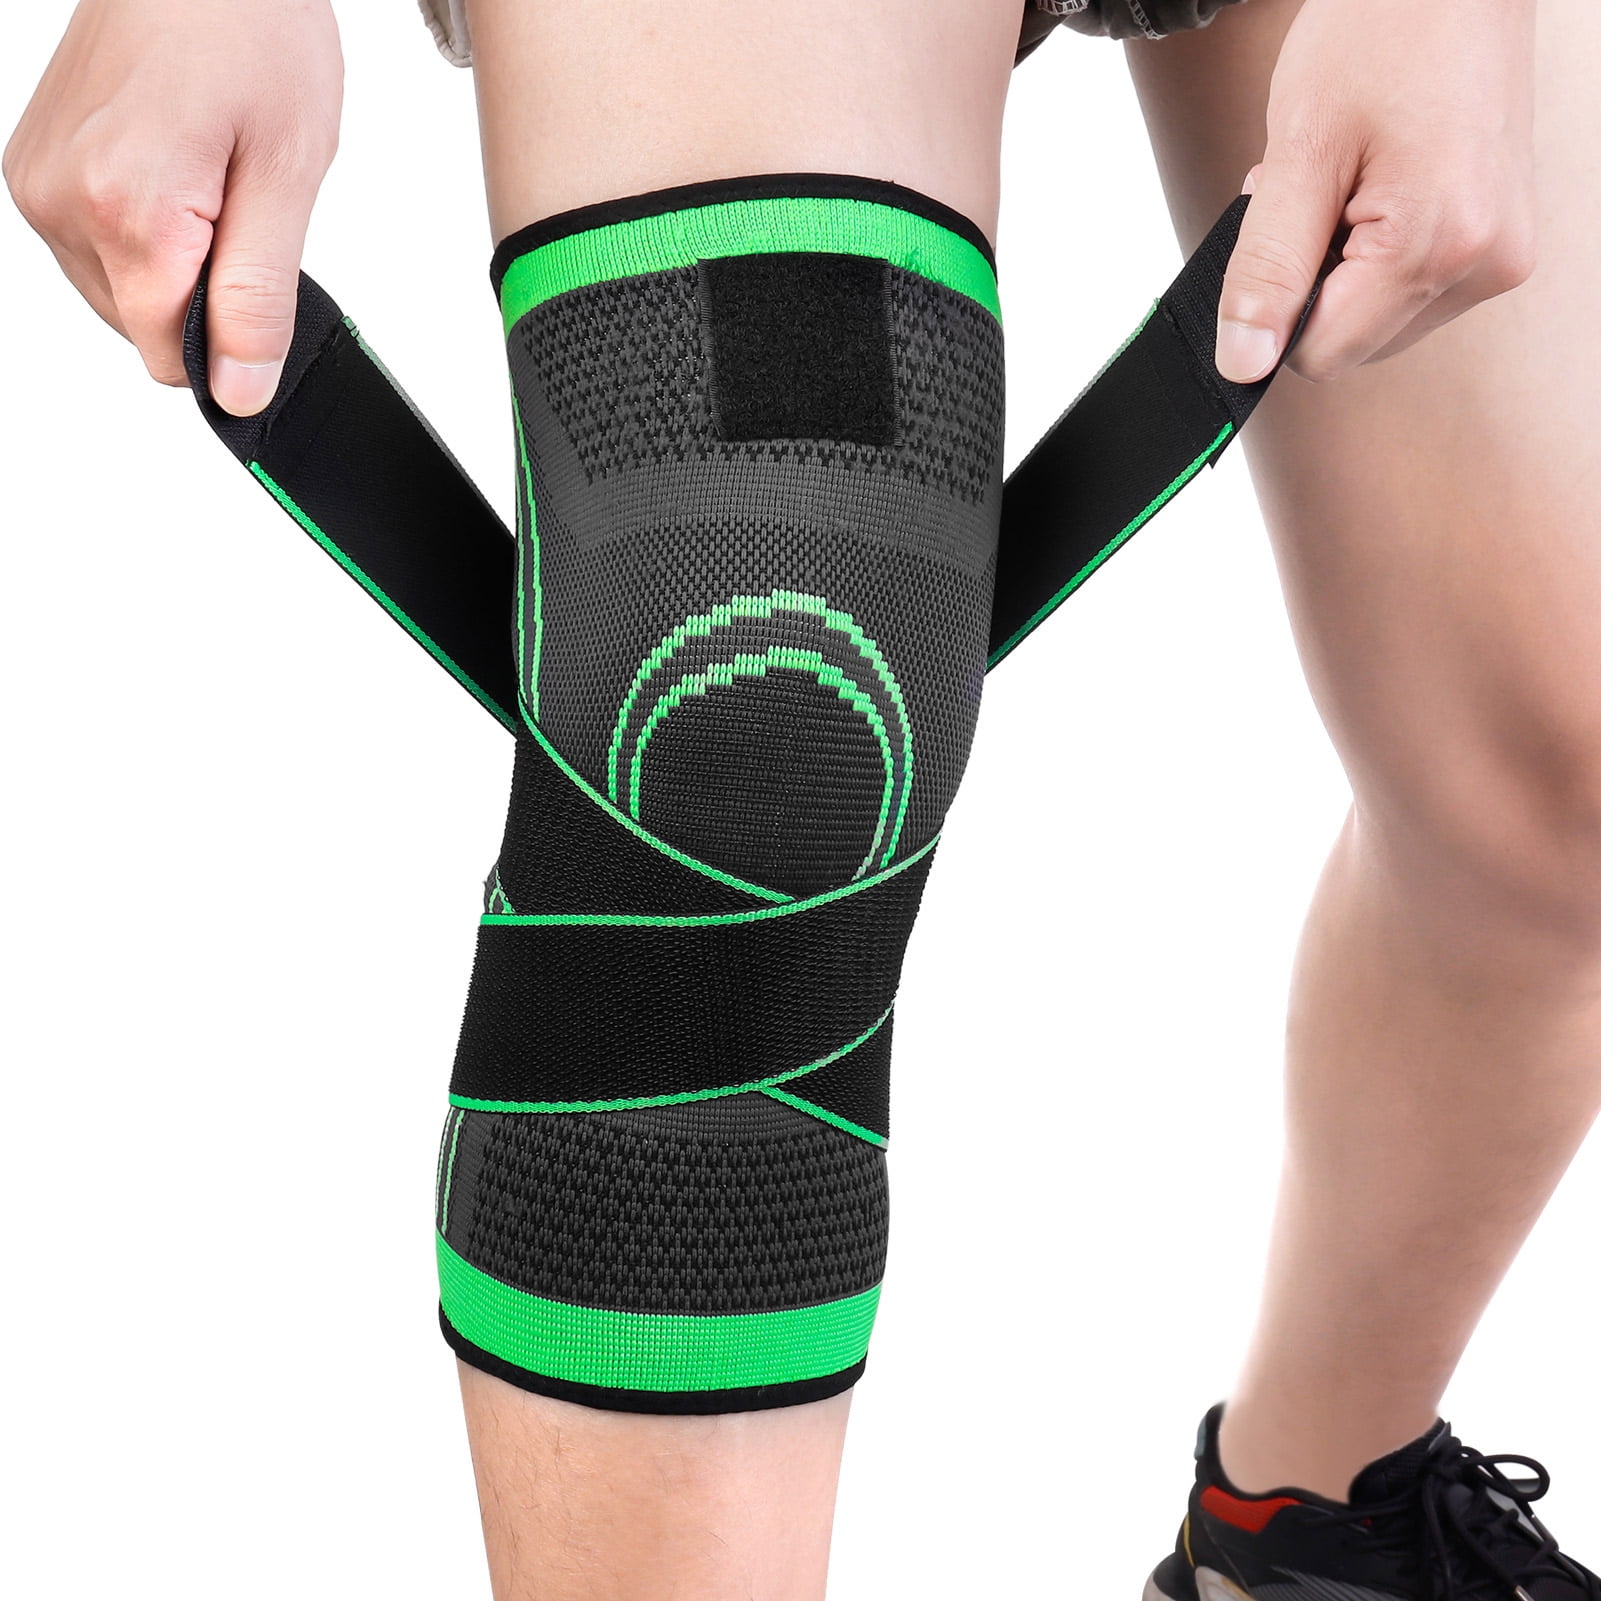 Knee Supports for Men Women - Compression Knee Sleeve for